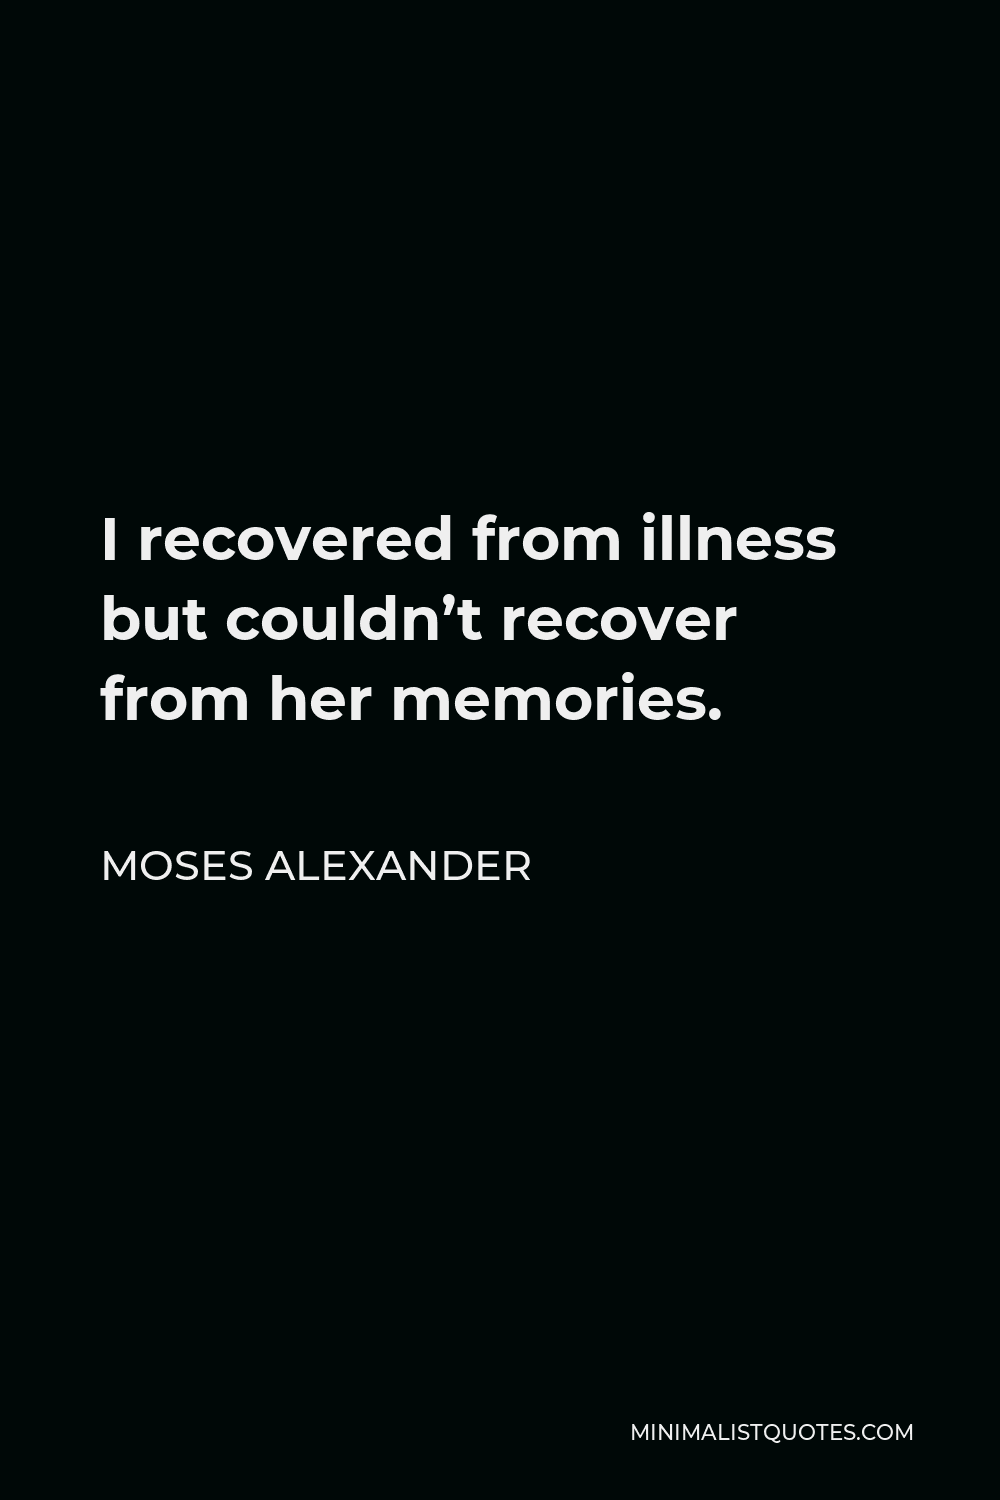 Moses Alexander Quote - I recovered from illness but couldn’t recover from her memories.